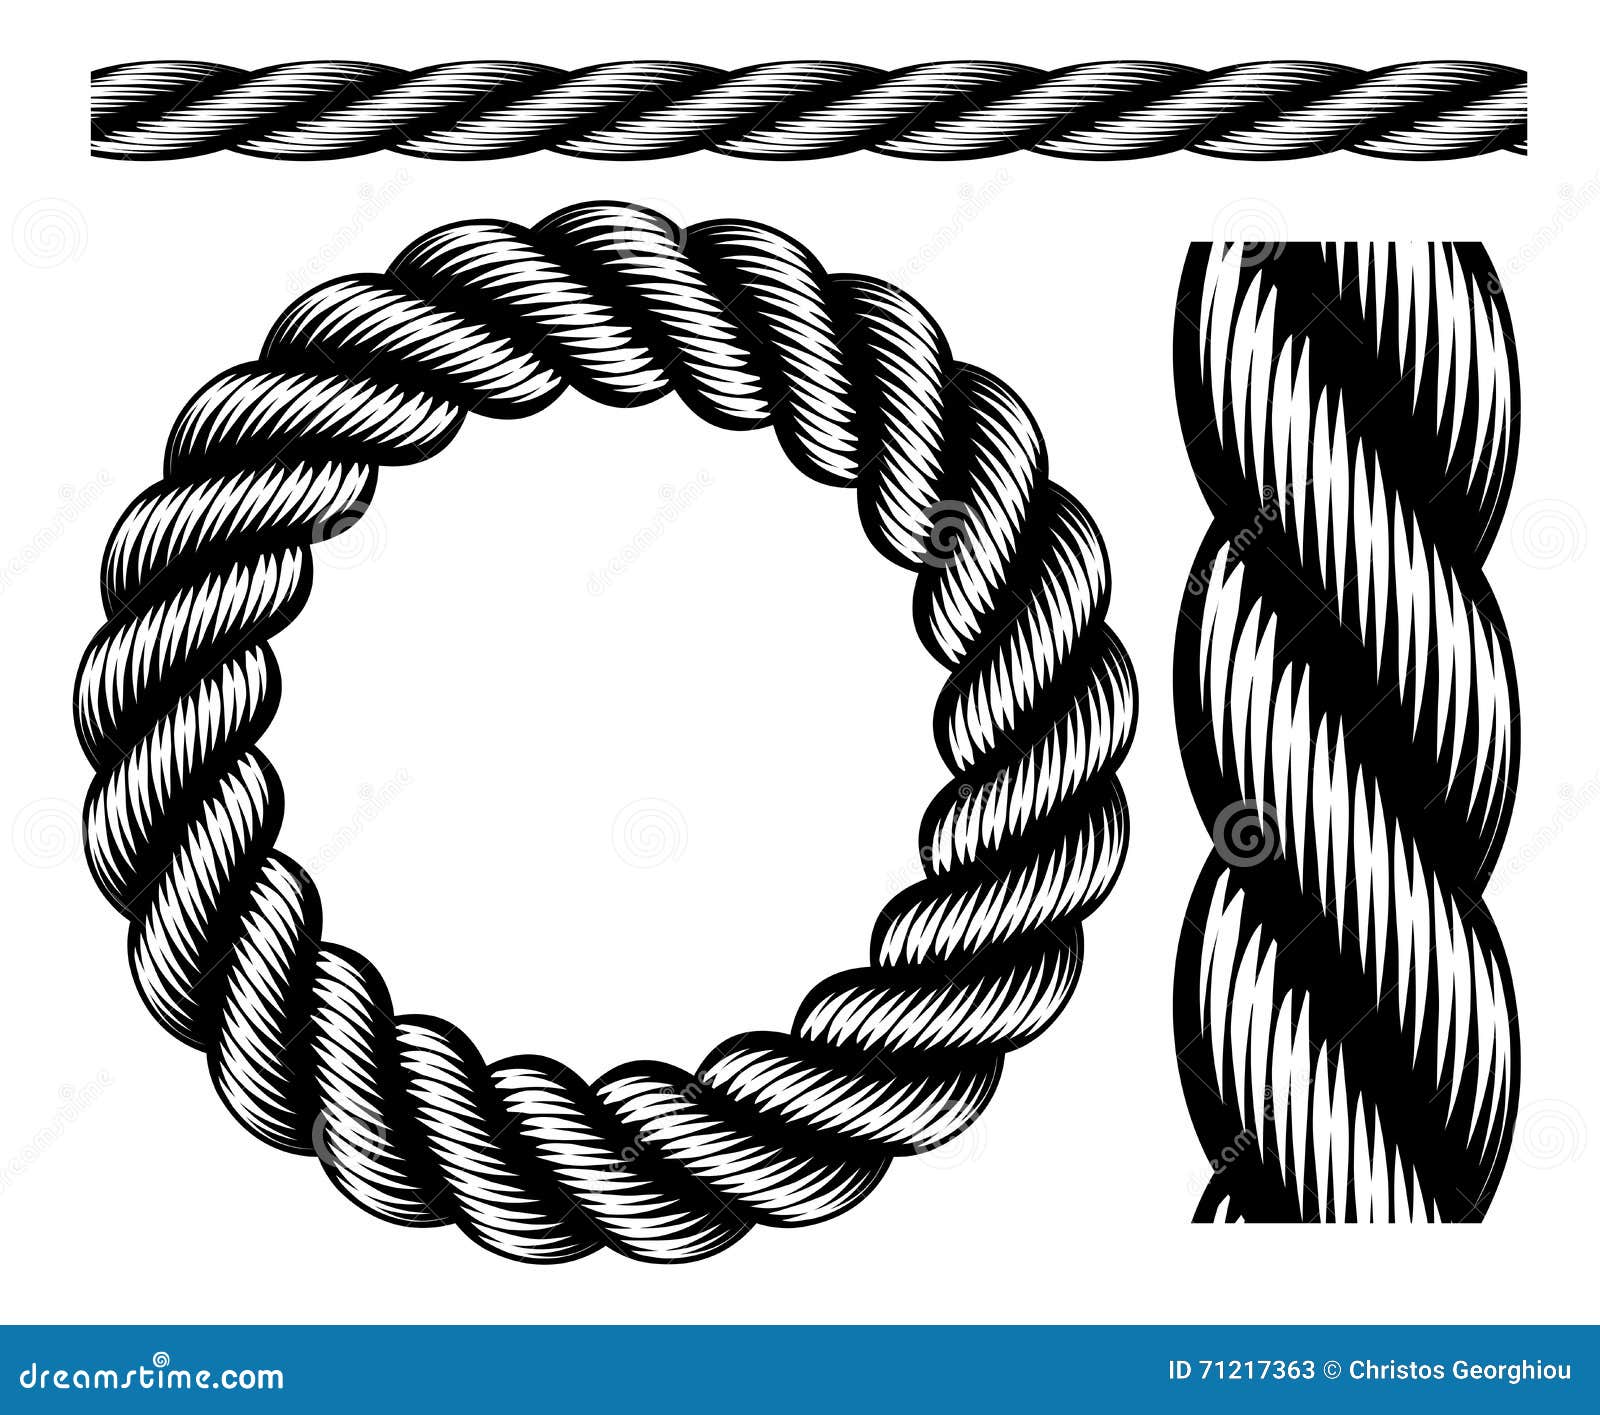 Rope Design Elements stock vector. Illustration of cord - 71217363